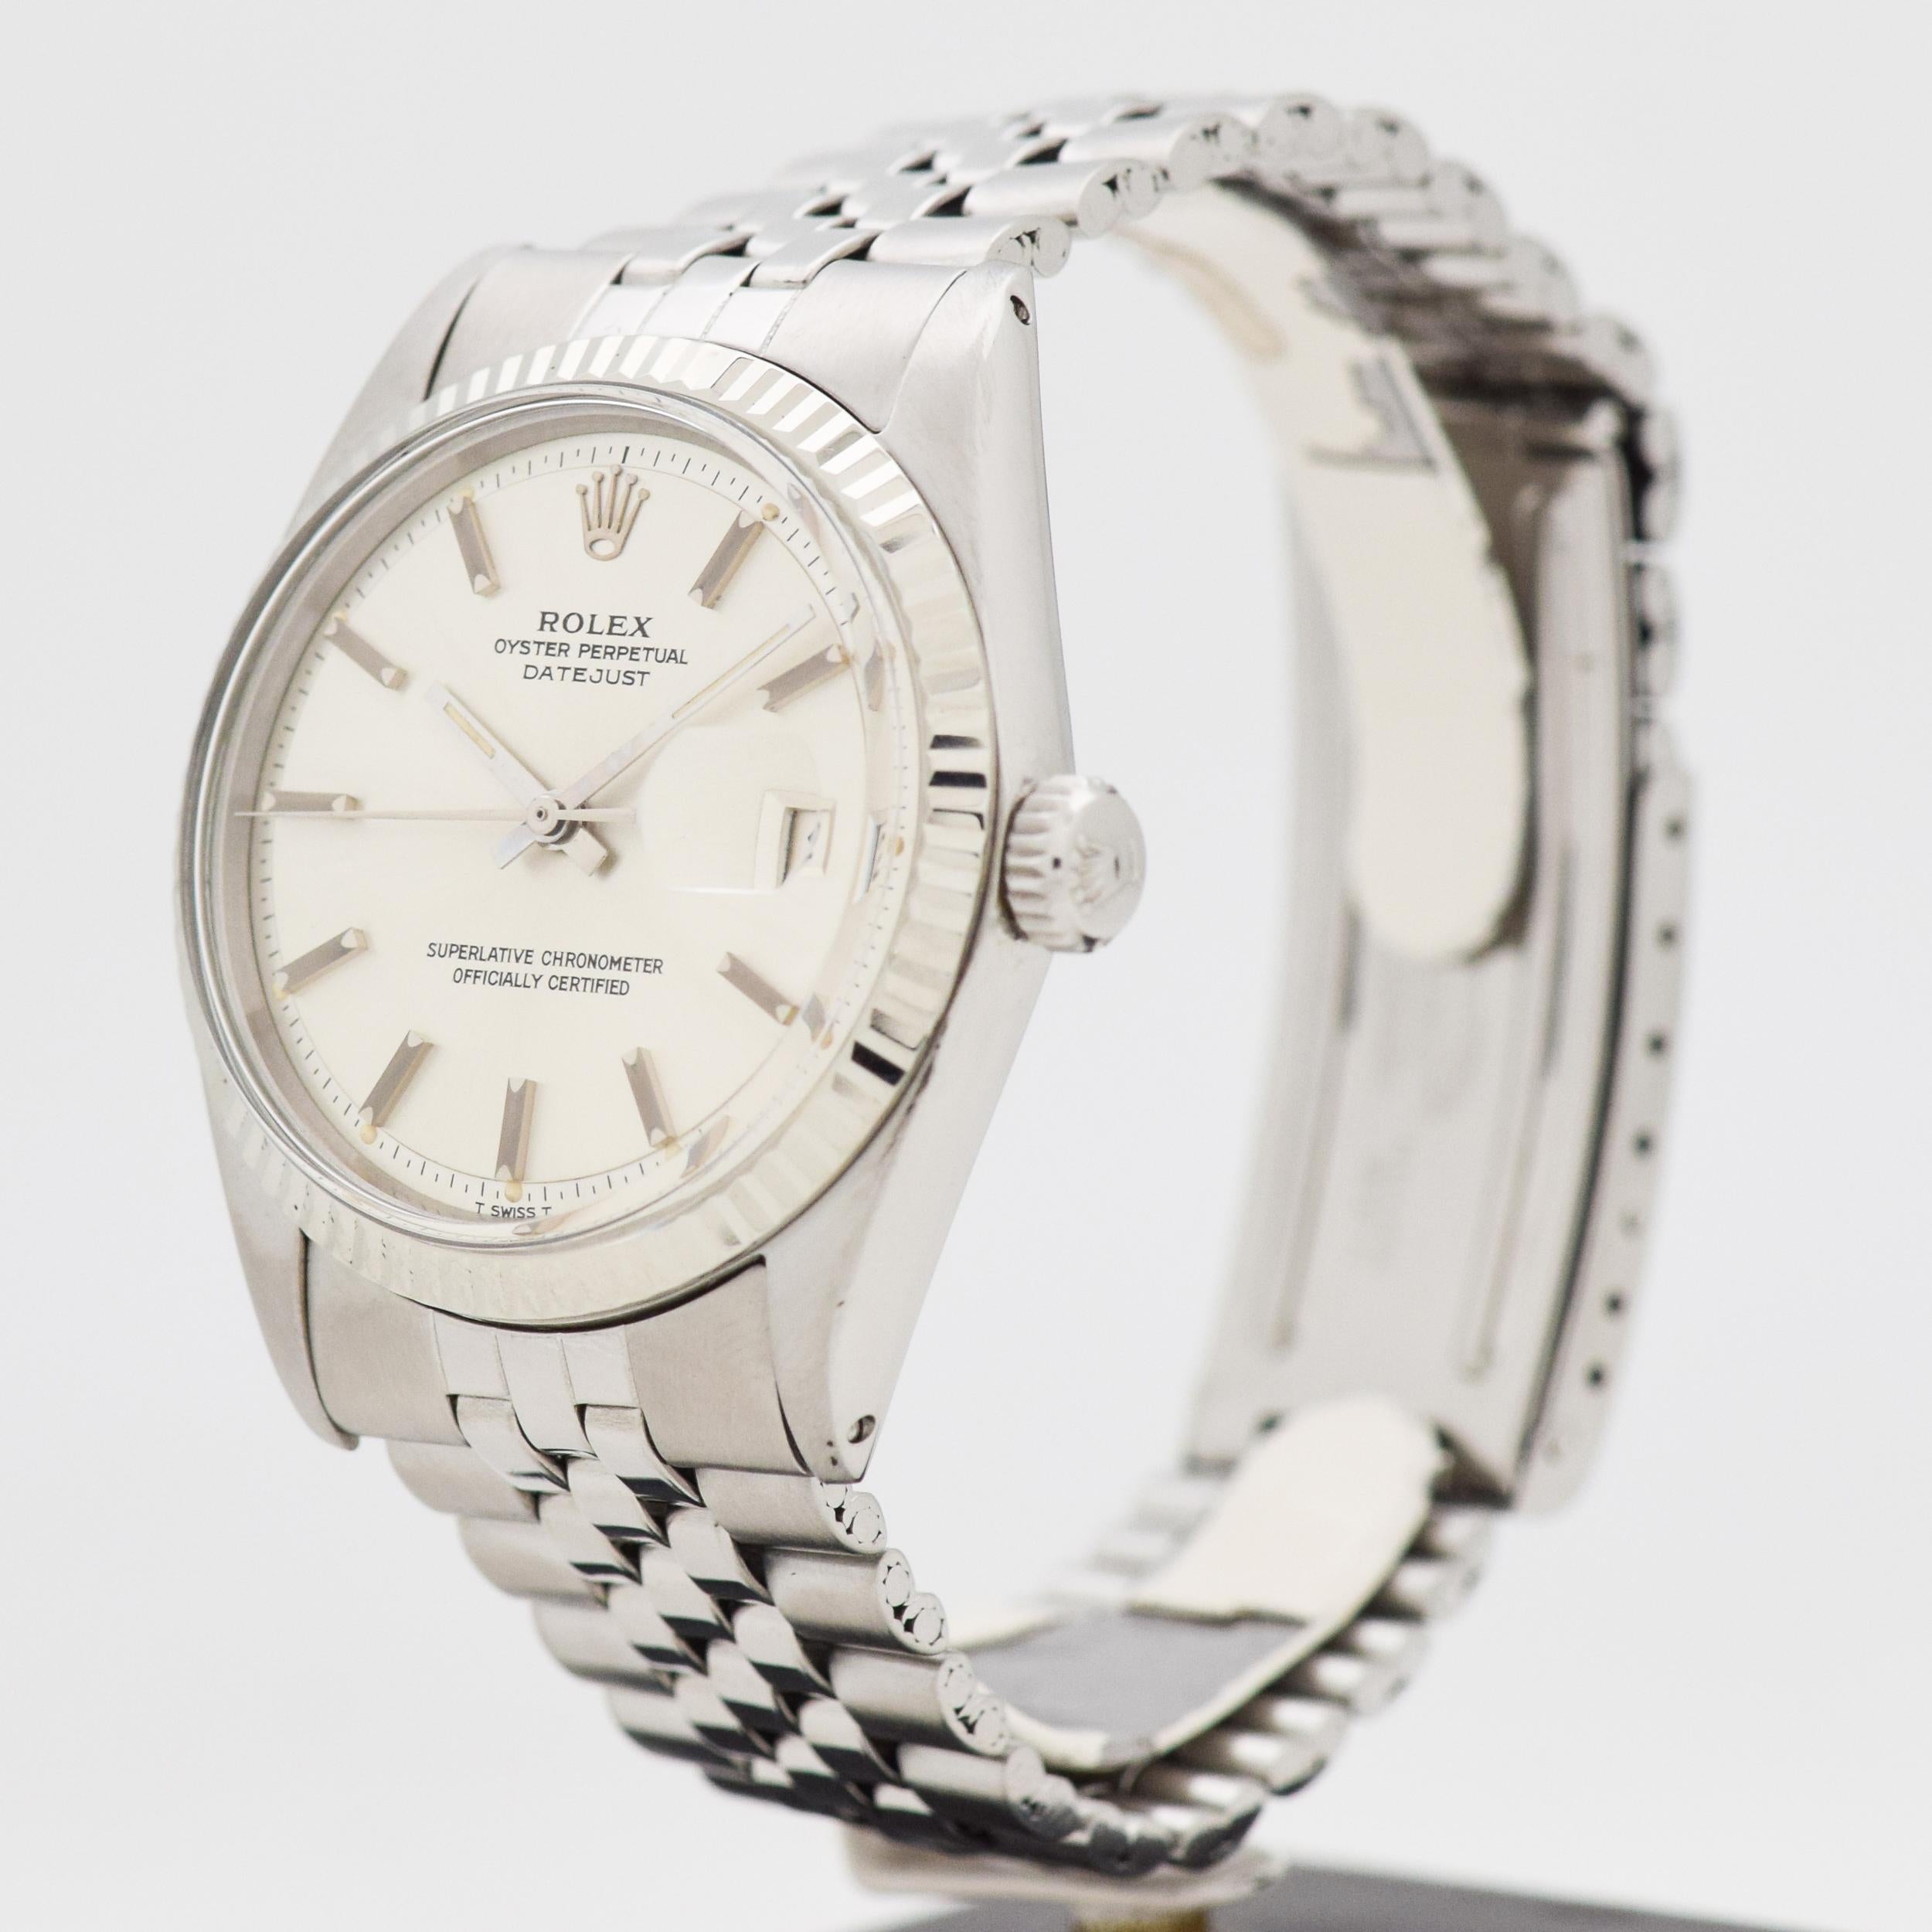 Vintage Rolex Datejust Reference 1601 Watch, 1970 In Excellent Condition For Sale In Beverly Hills, CA